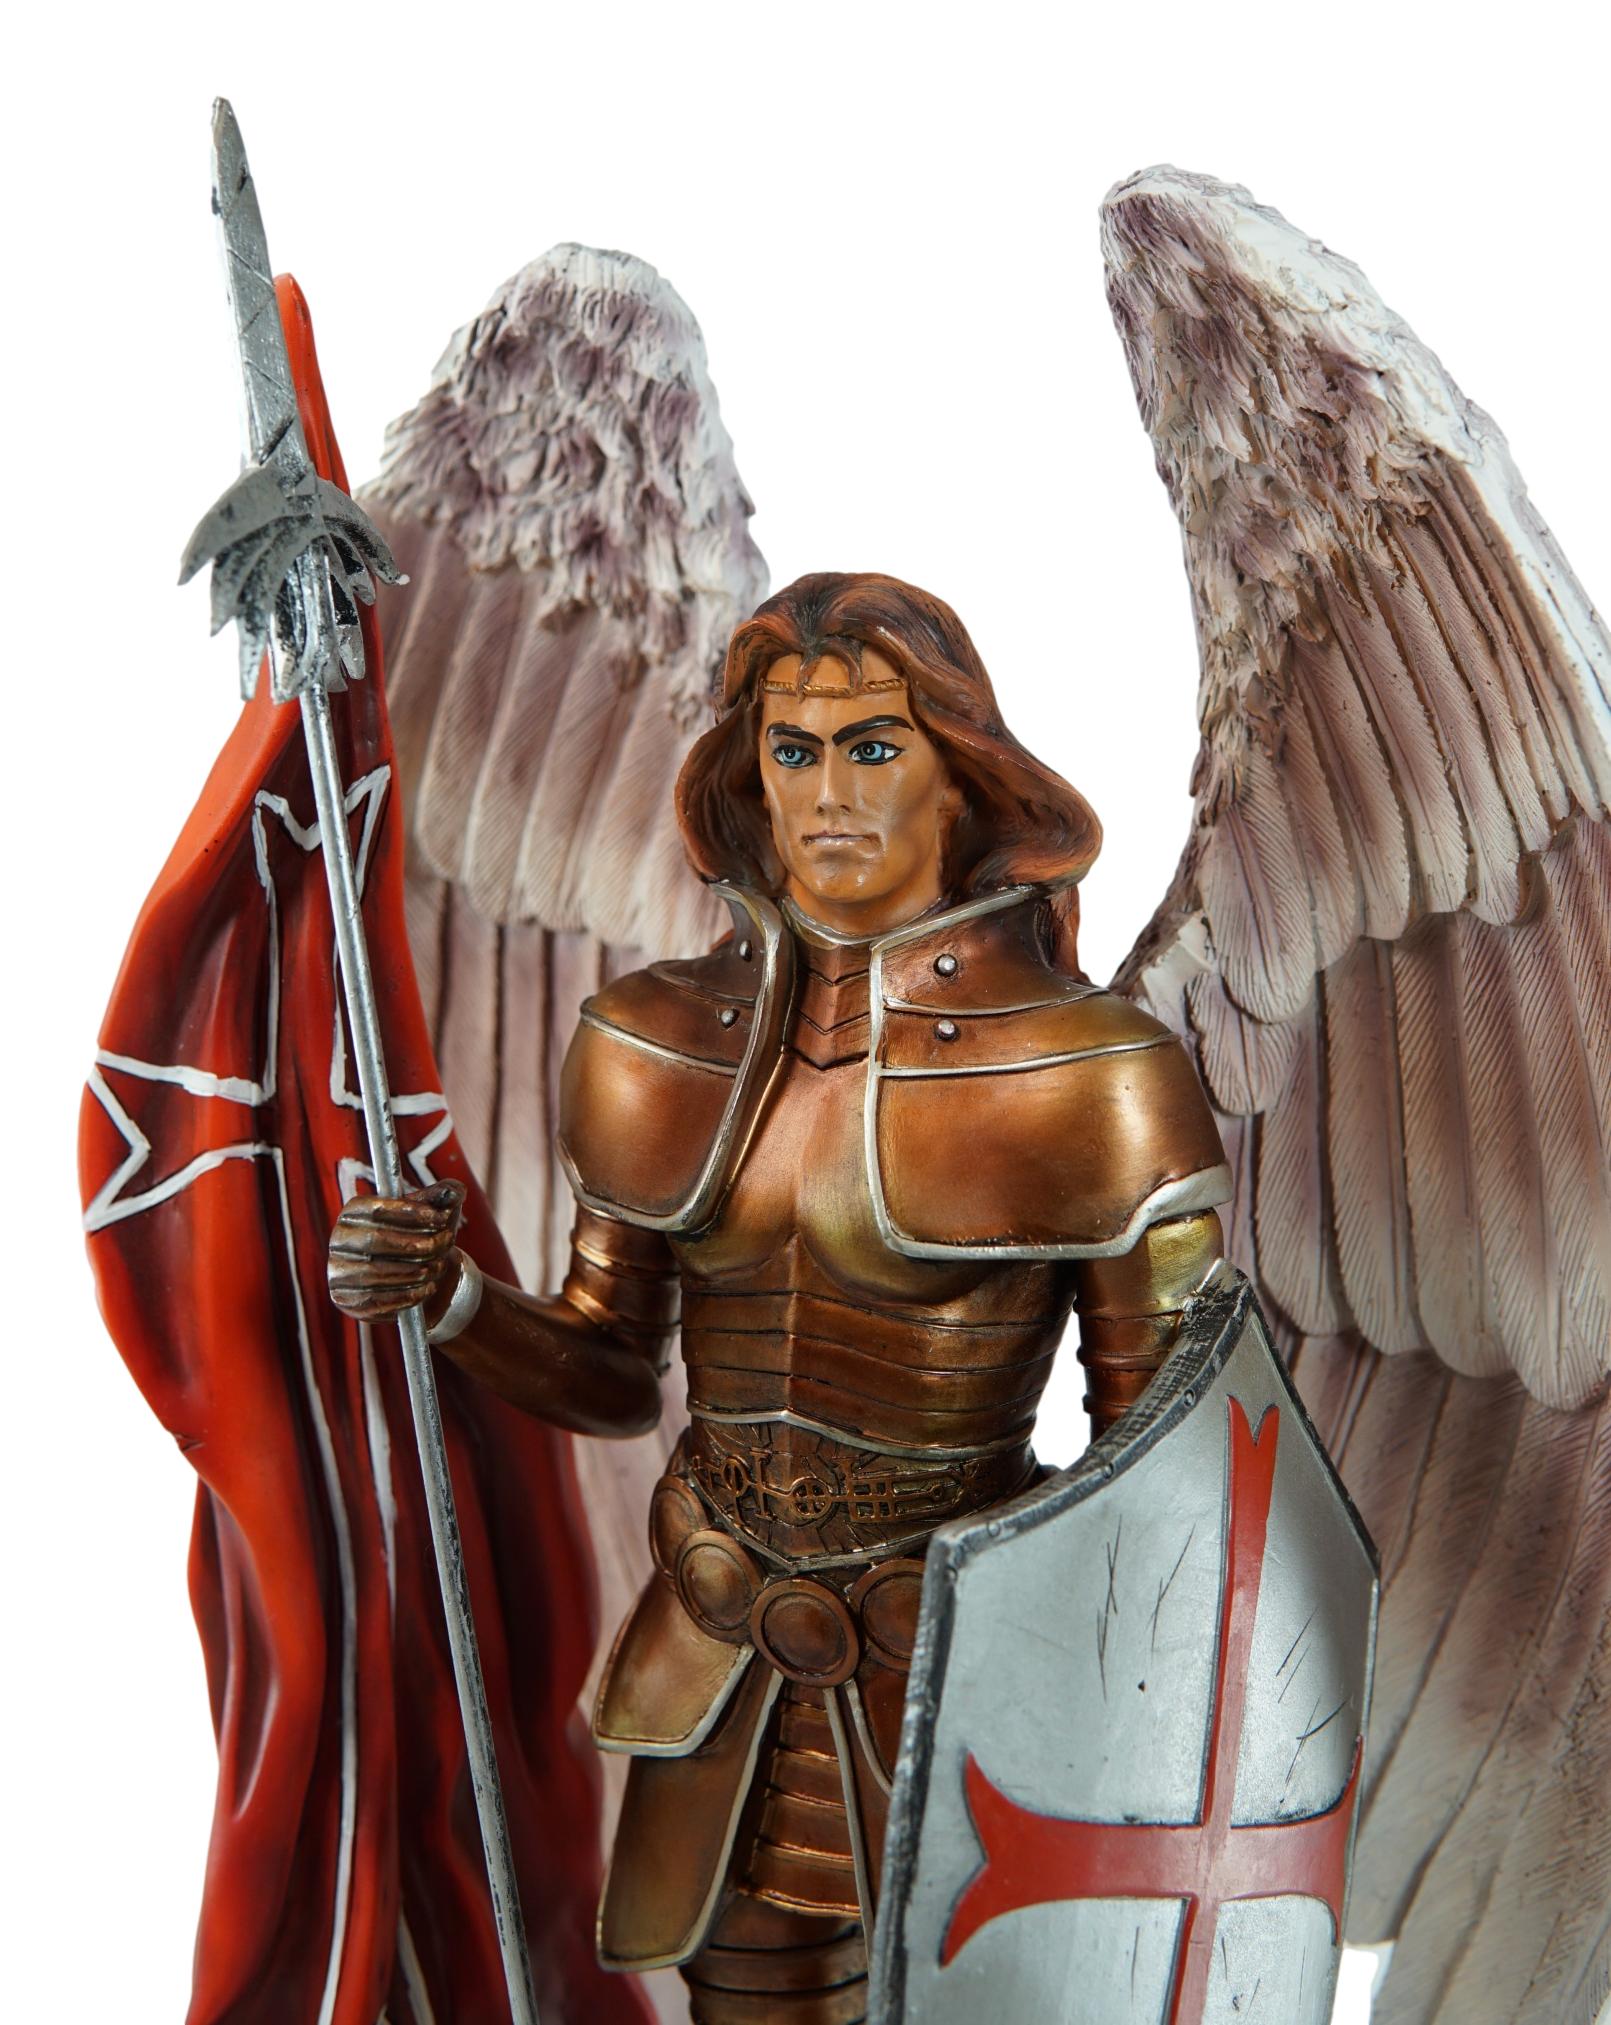 Ebros Large Archangel Saint Raphael With Spear And Faith Shield Statue - image 5 of 7